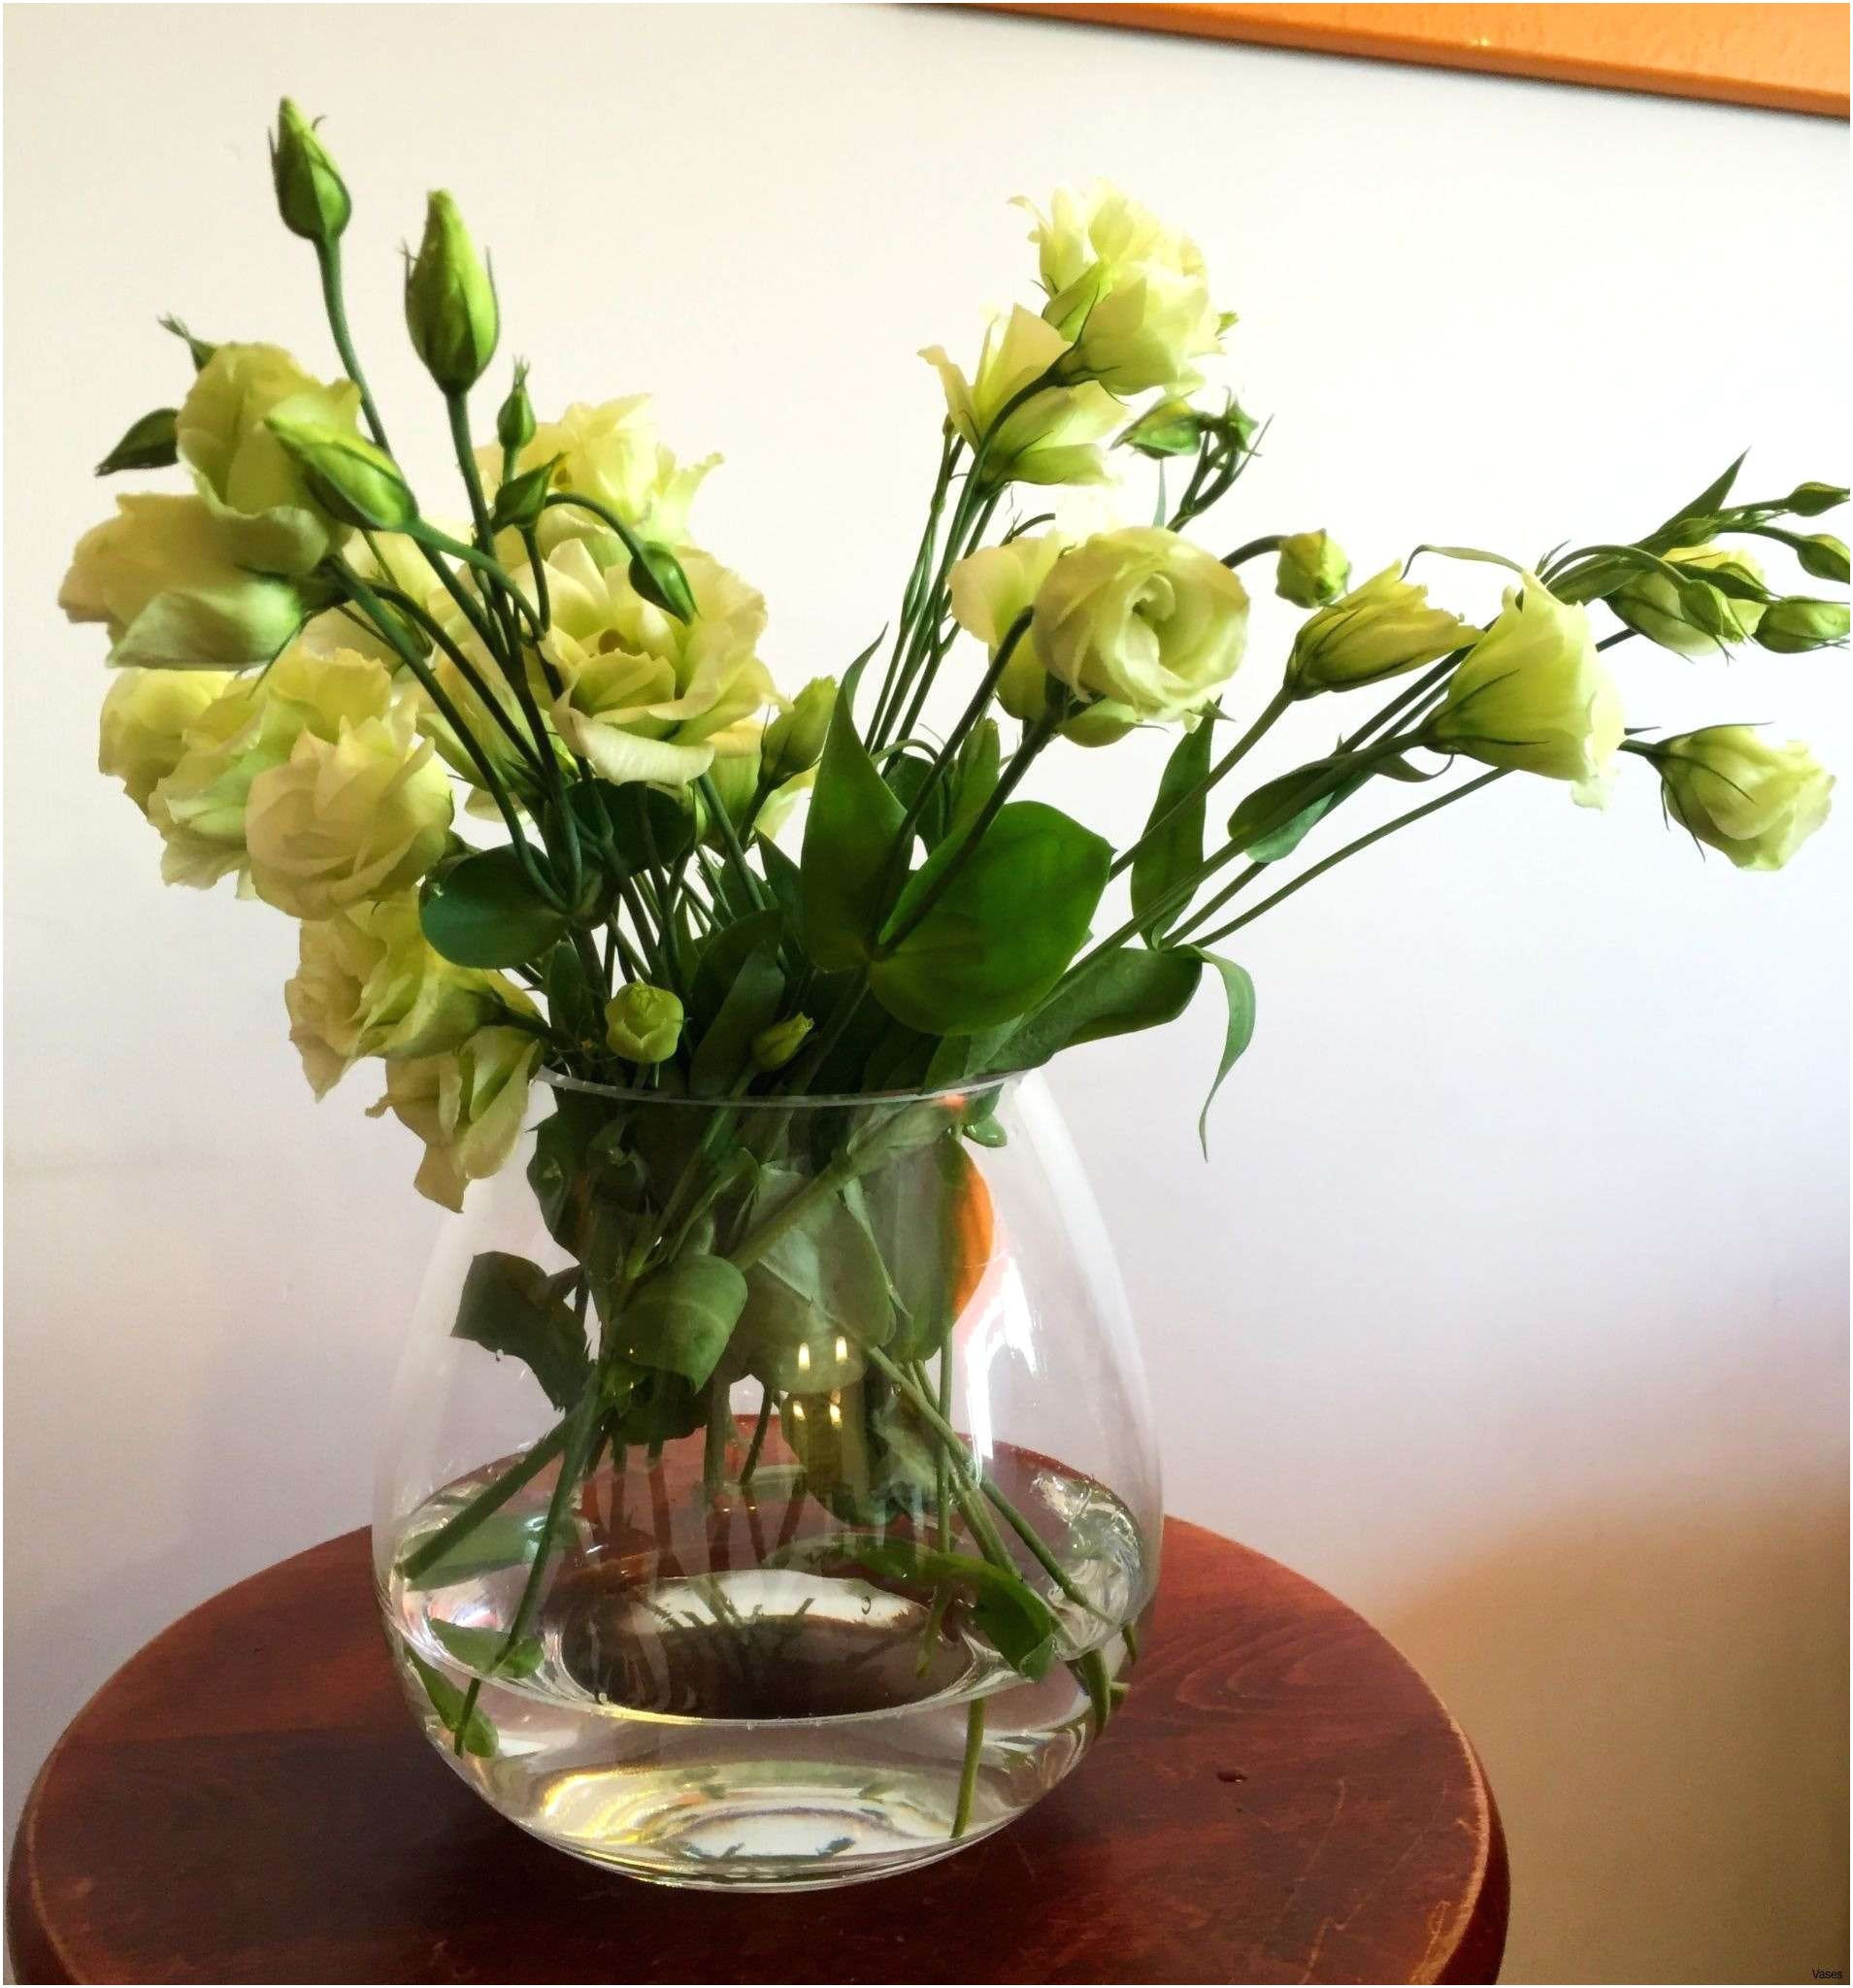 28 Spectacular Green Murano Glass Vase 2024 free download green murano glass vase of tall green glass vase image tiger height awful flower vase table 04h pertaining to tall green glass vase image tiger height awful flower vase table 04h vases table